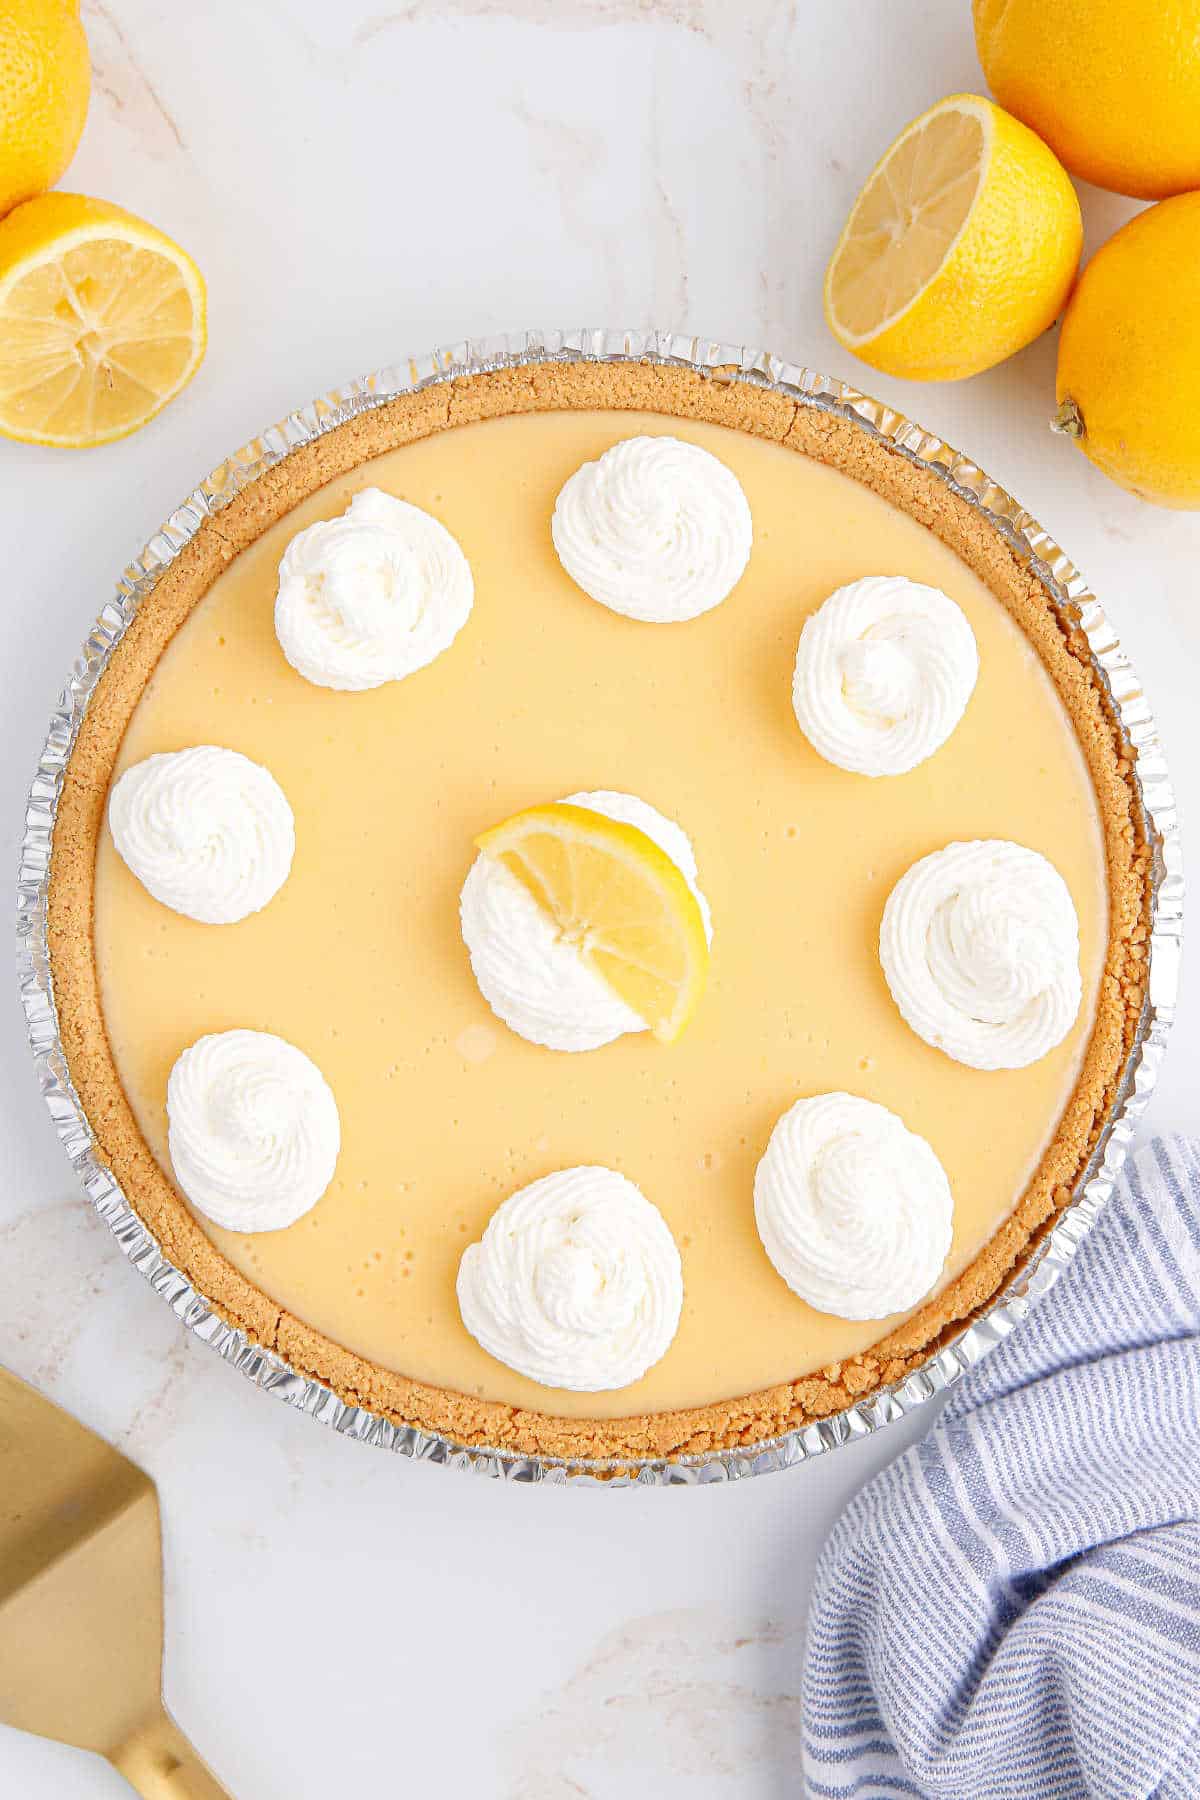 A classic lemon pie garnished with whipped cream and a lemon slice.